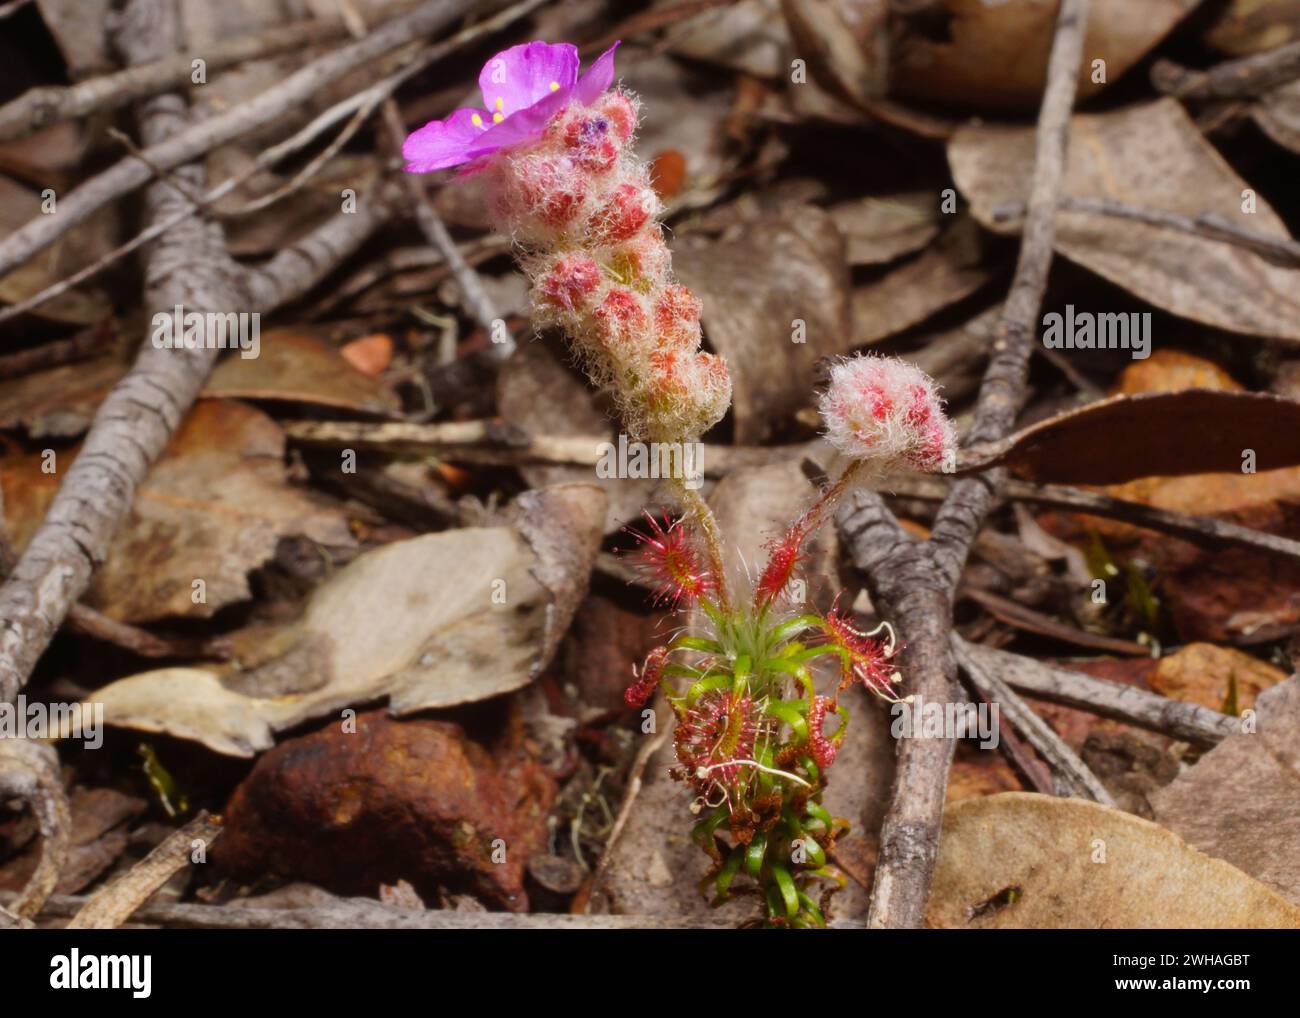 Carnivorous pygmy sundew Drosera lasiantha with pink flower and flower stalk covered in wooly hairs, in natural habitat, Western Australia Stock Photo